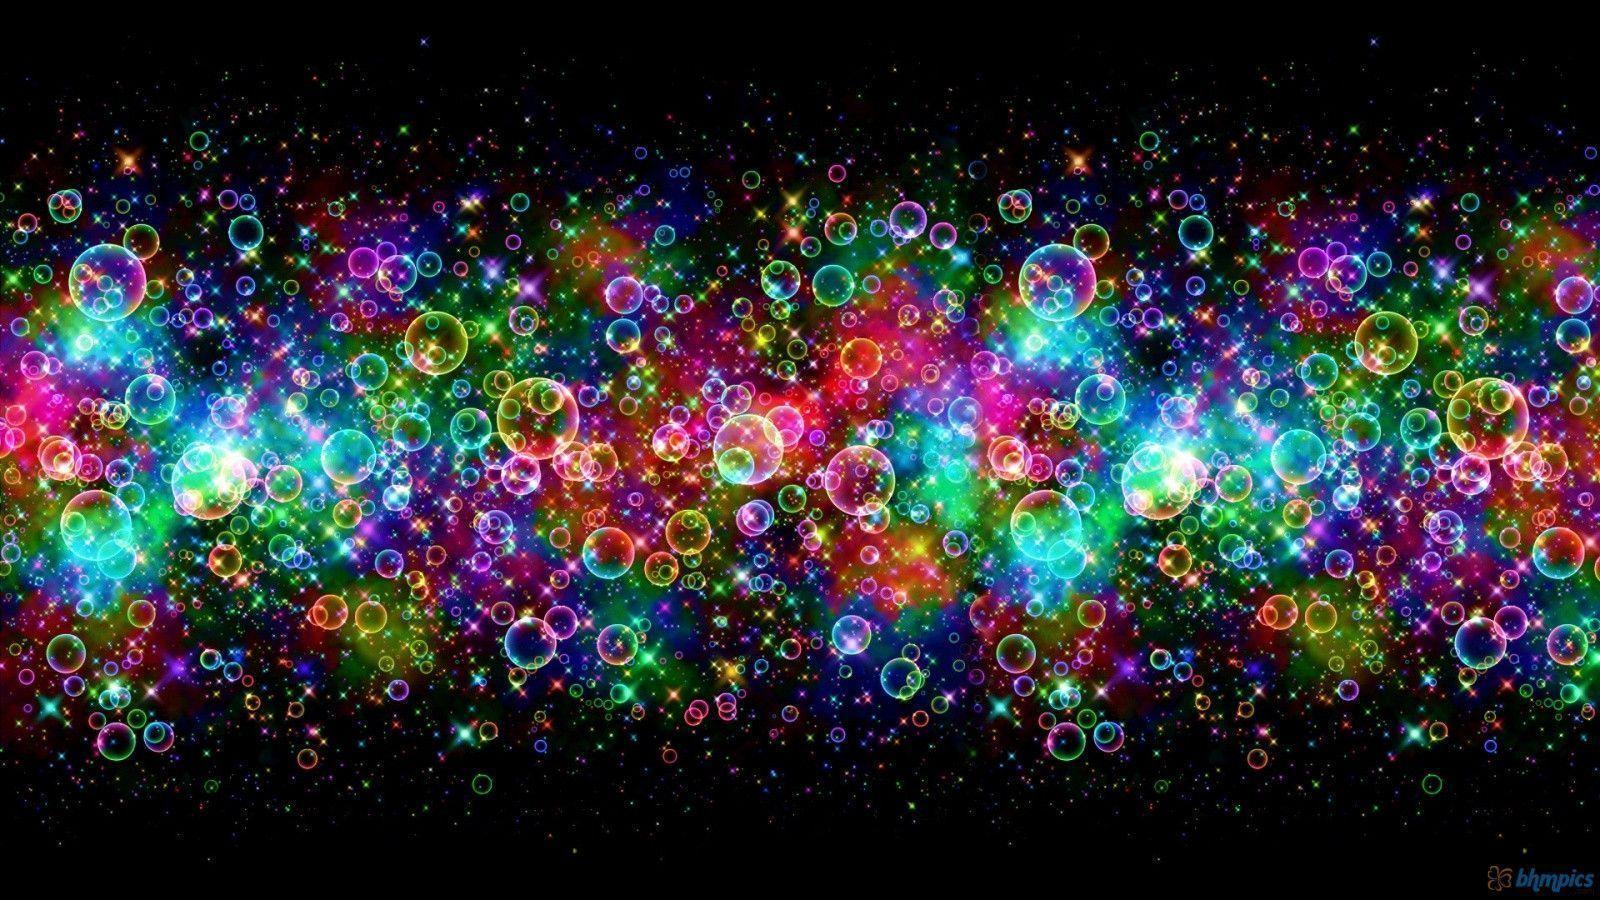 3D Colorful Abstract Background HD Cool 7 HD Wallpaper